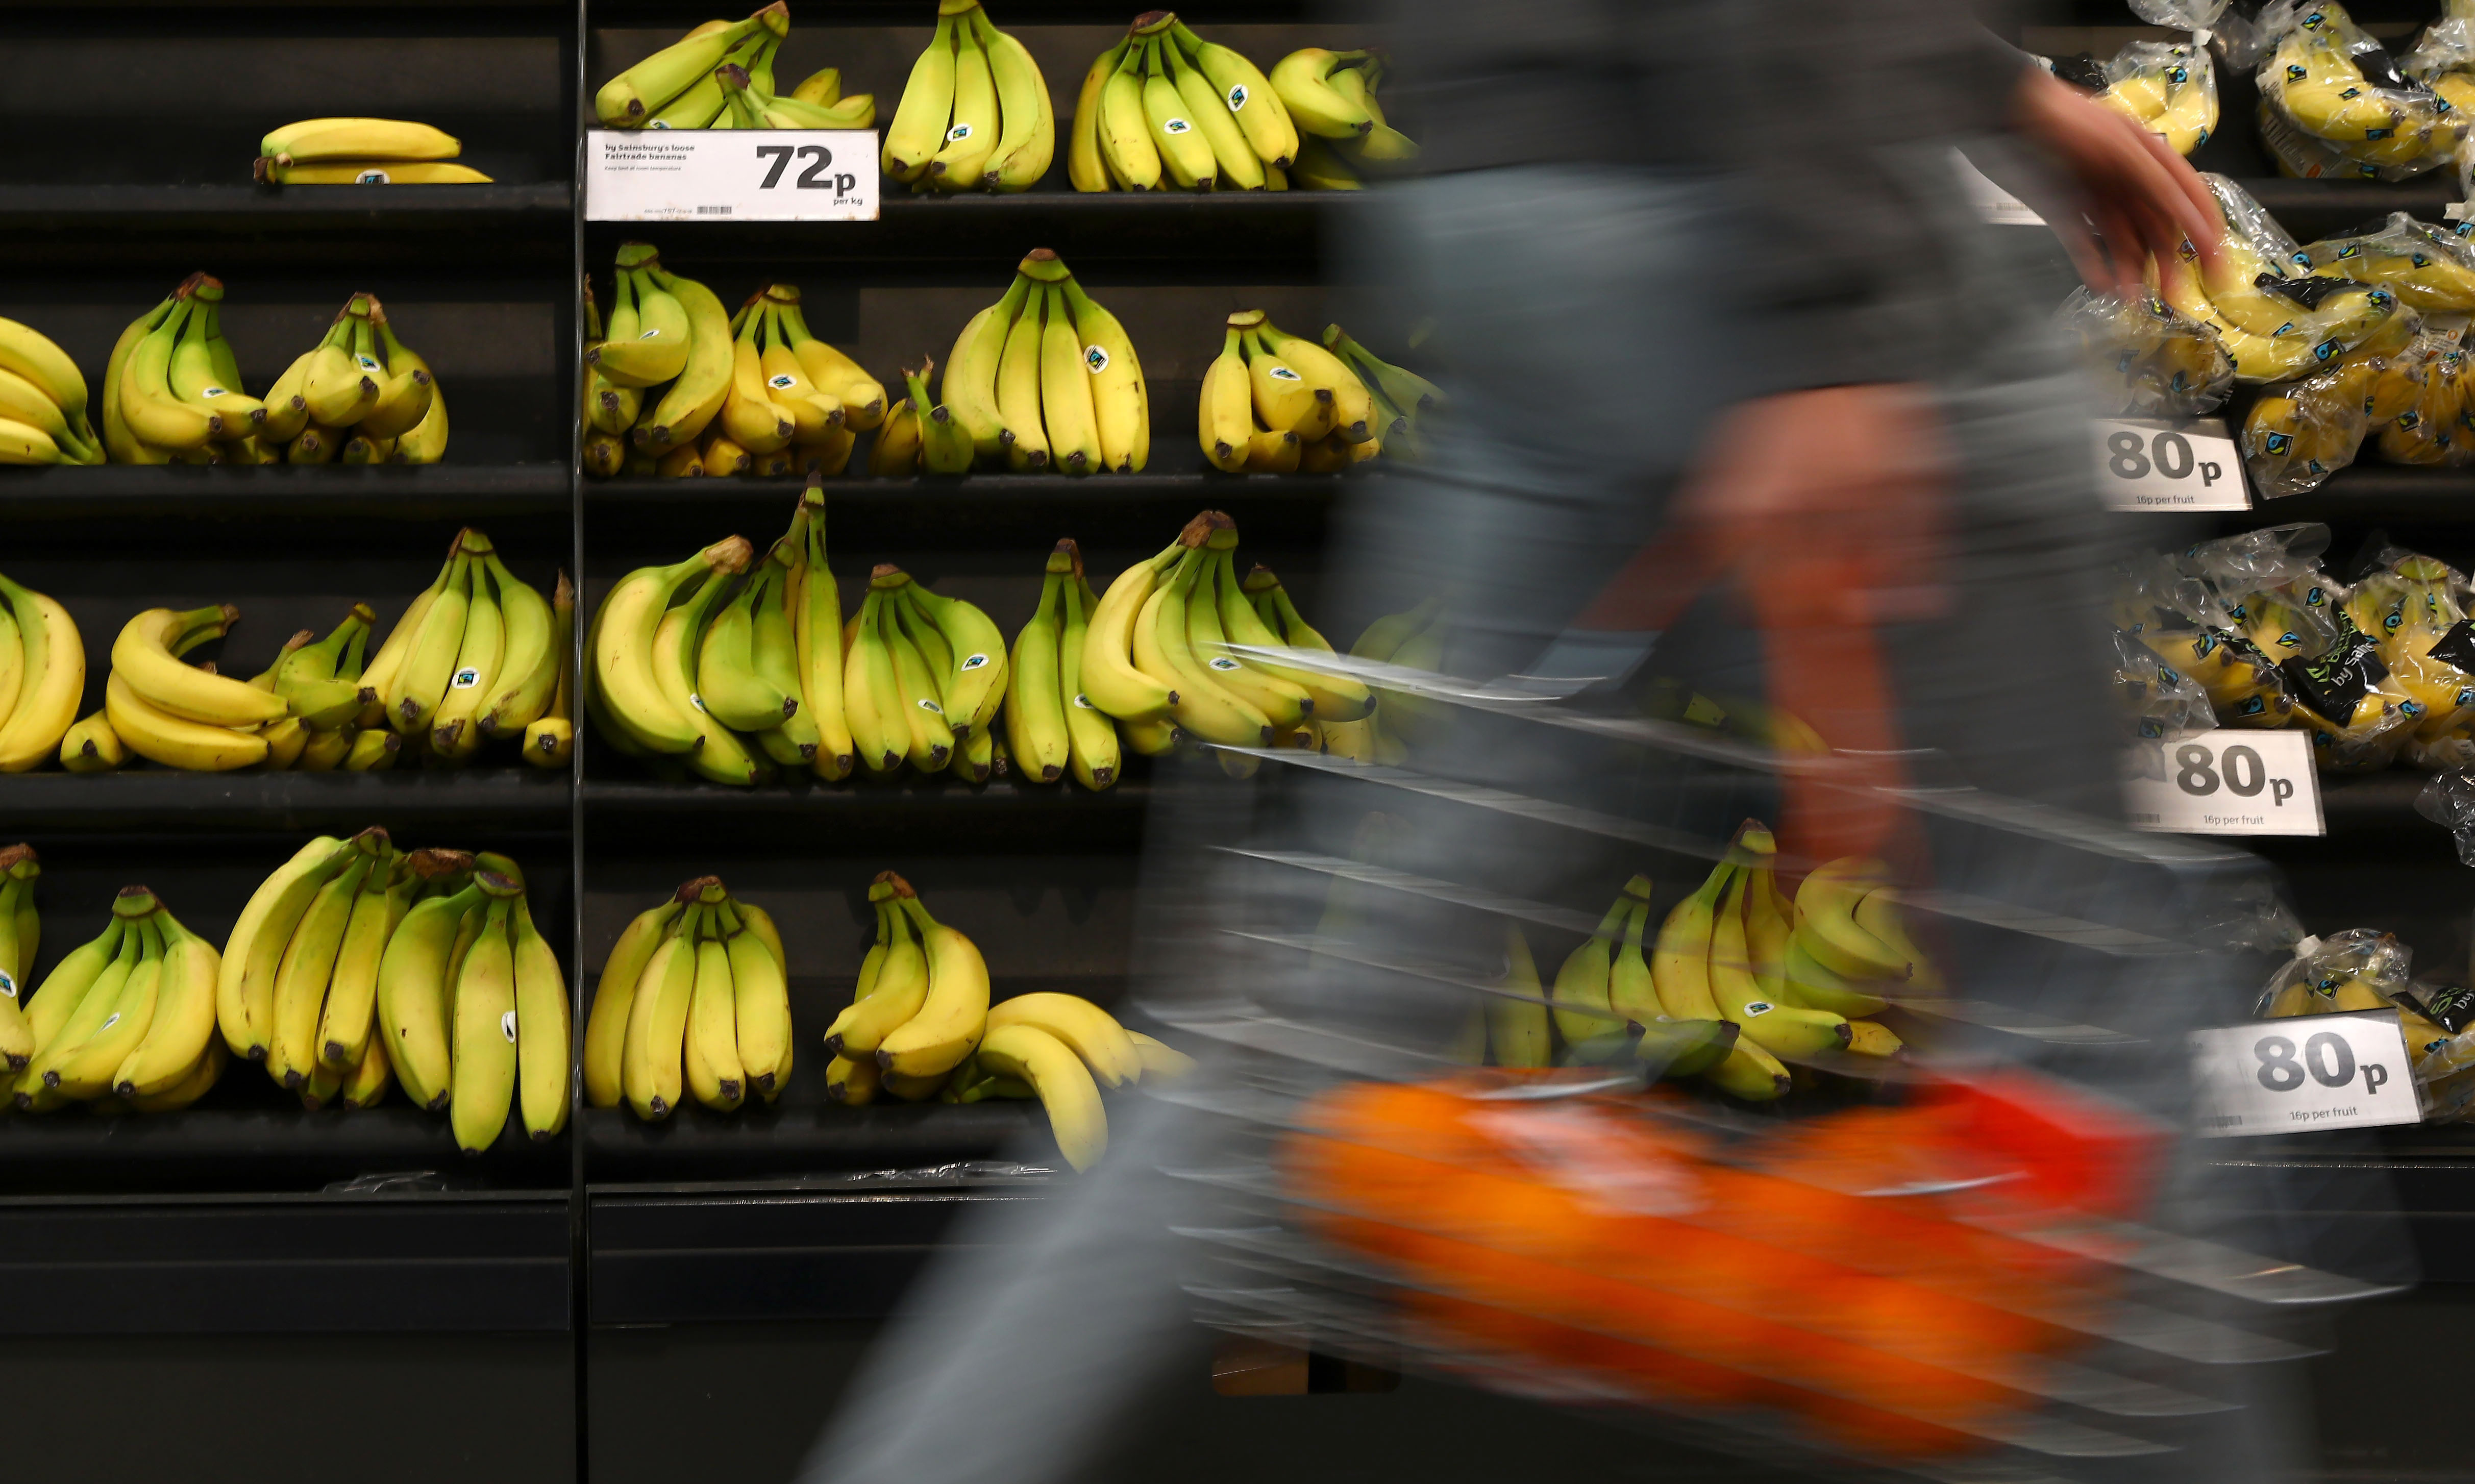 A shopper passes a display of bananas a supermarket in London